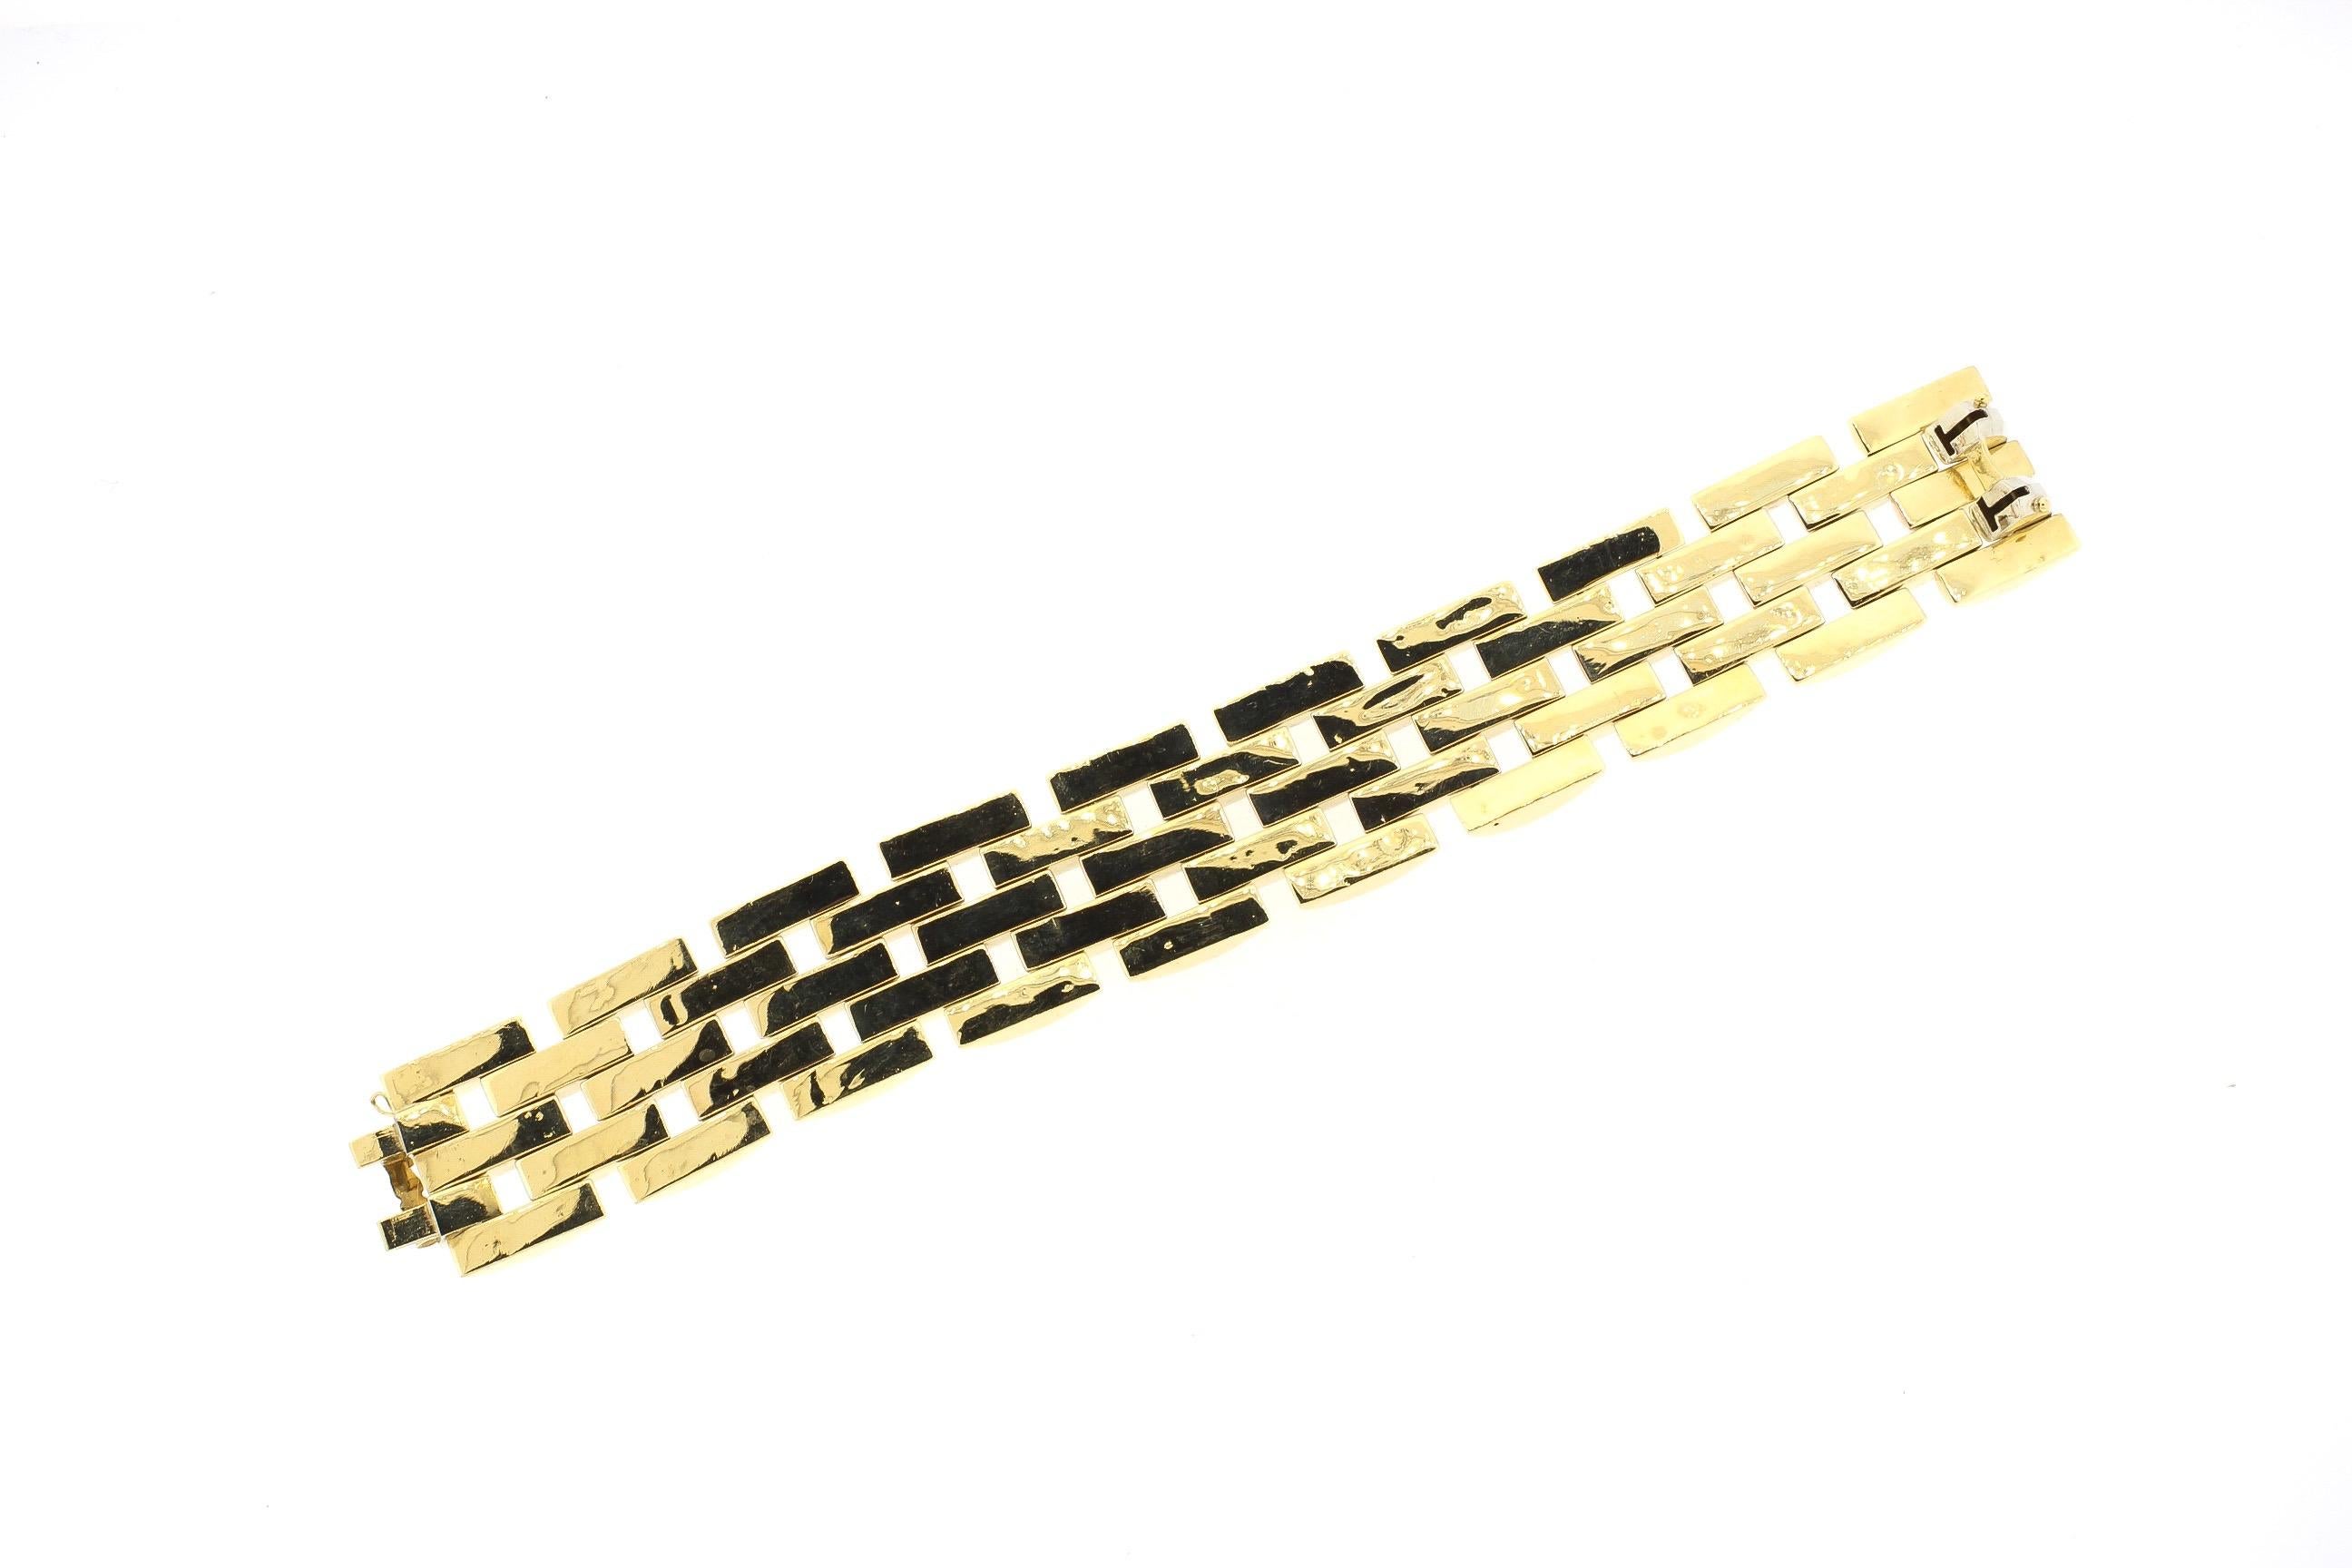 A Retro 18k tri color gold wide link bracelet, circa 1940. The three colors of gold - rose, yellow and green are classic Retro characteristics. This wide bracelet has alternating three rows and two rows of faceted links that create reflection. The